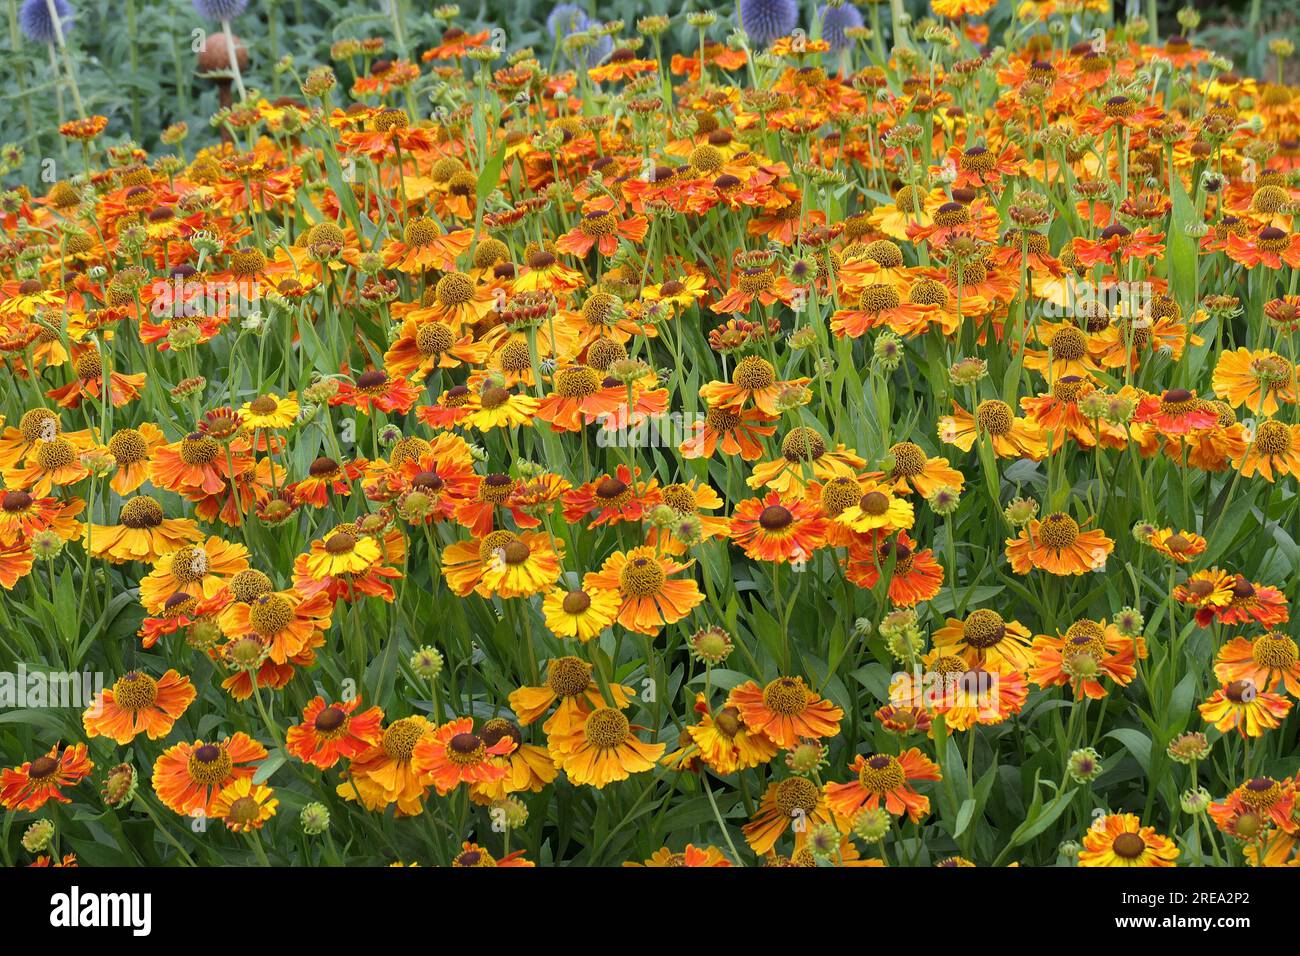 Closeup of the multicoloured summer long flowering herbaceous perennial garden plant helenium Waltraut or Sneezeweed filling the frame. Stock Photo